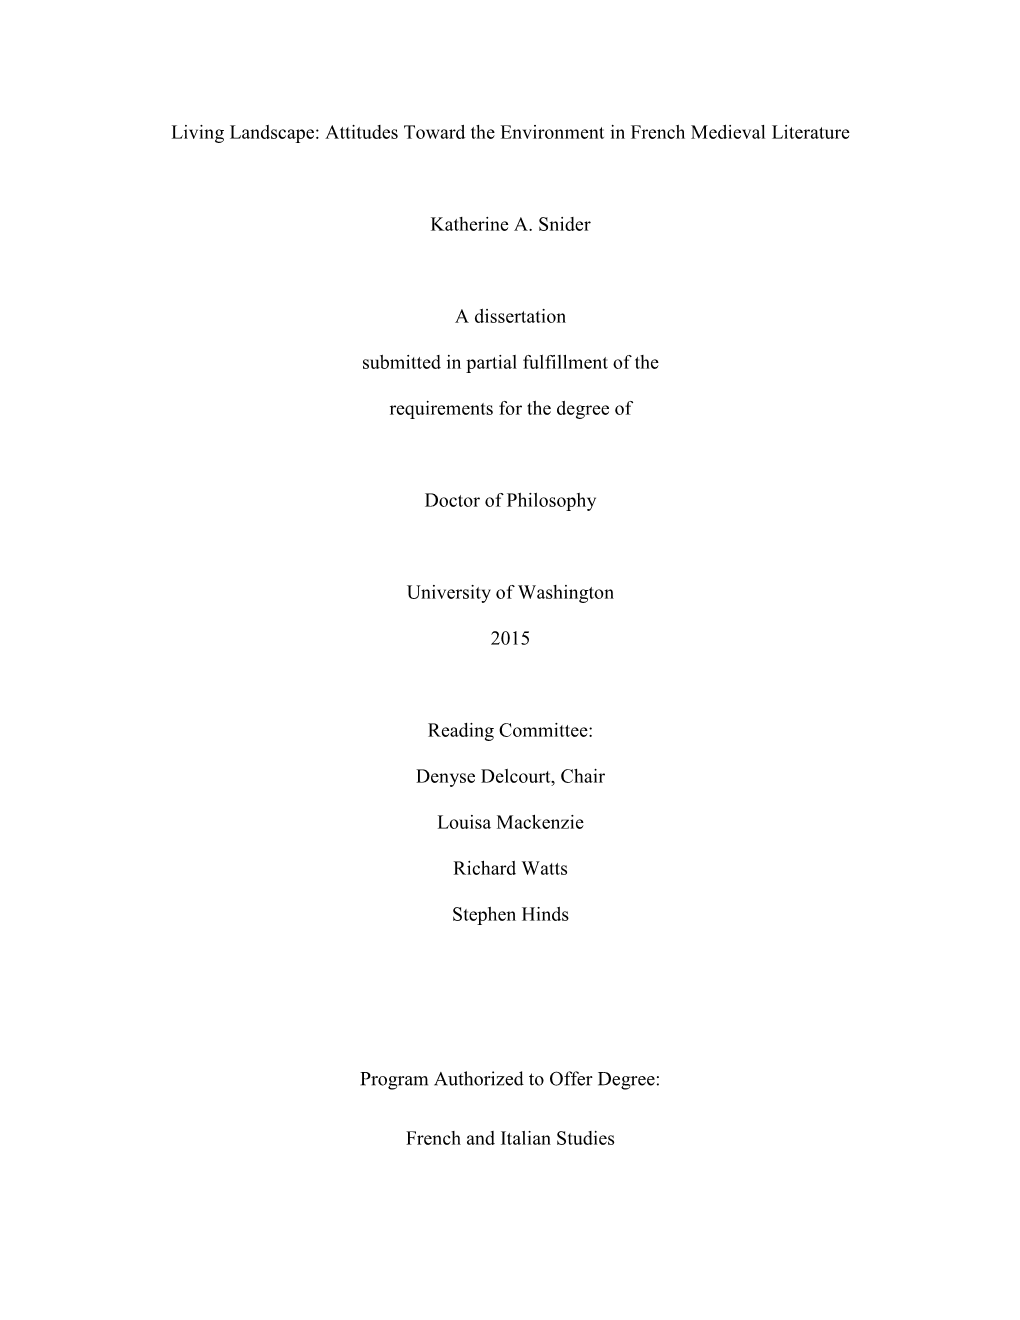 Living Landscape: Attitudes Toward the Environment in French Medieval Literature Katherine A. Snider a Dissertation Submitted In